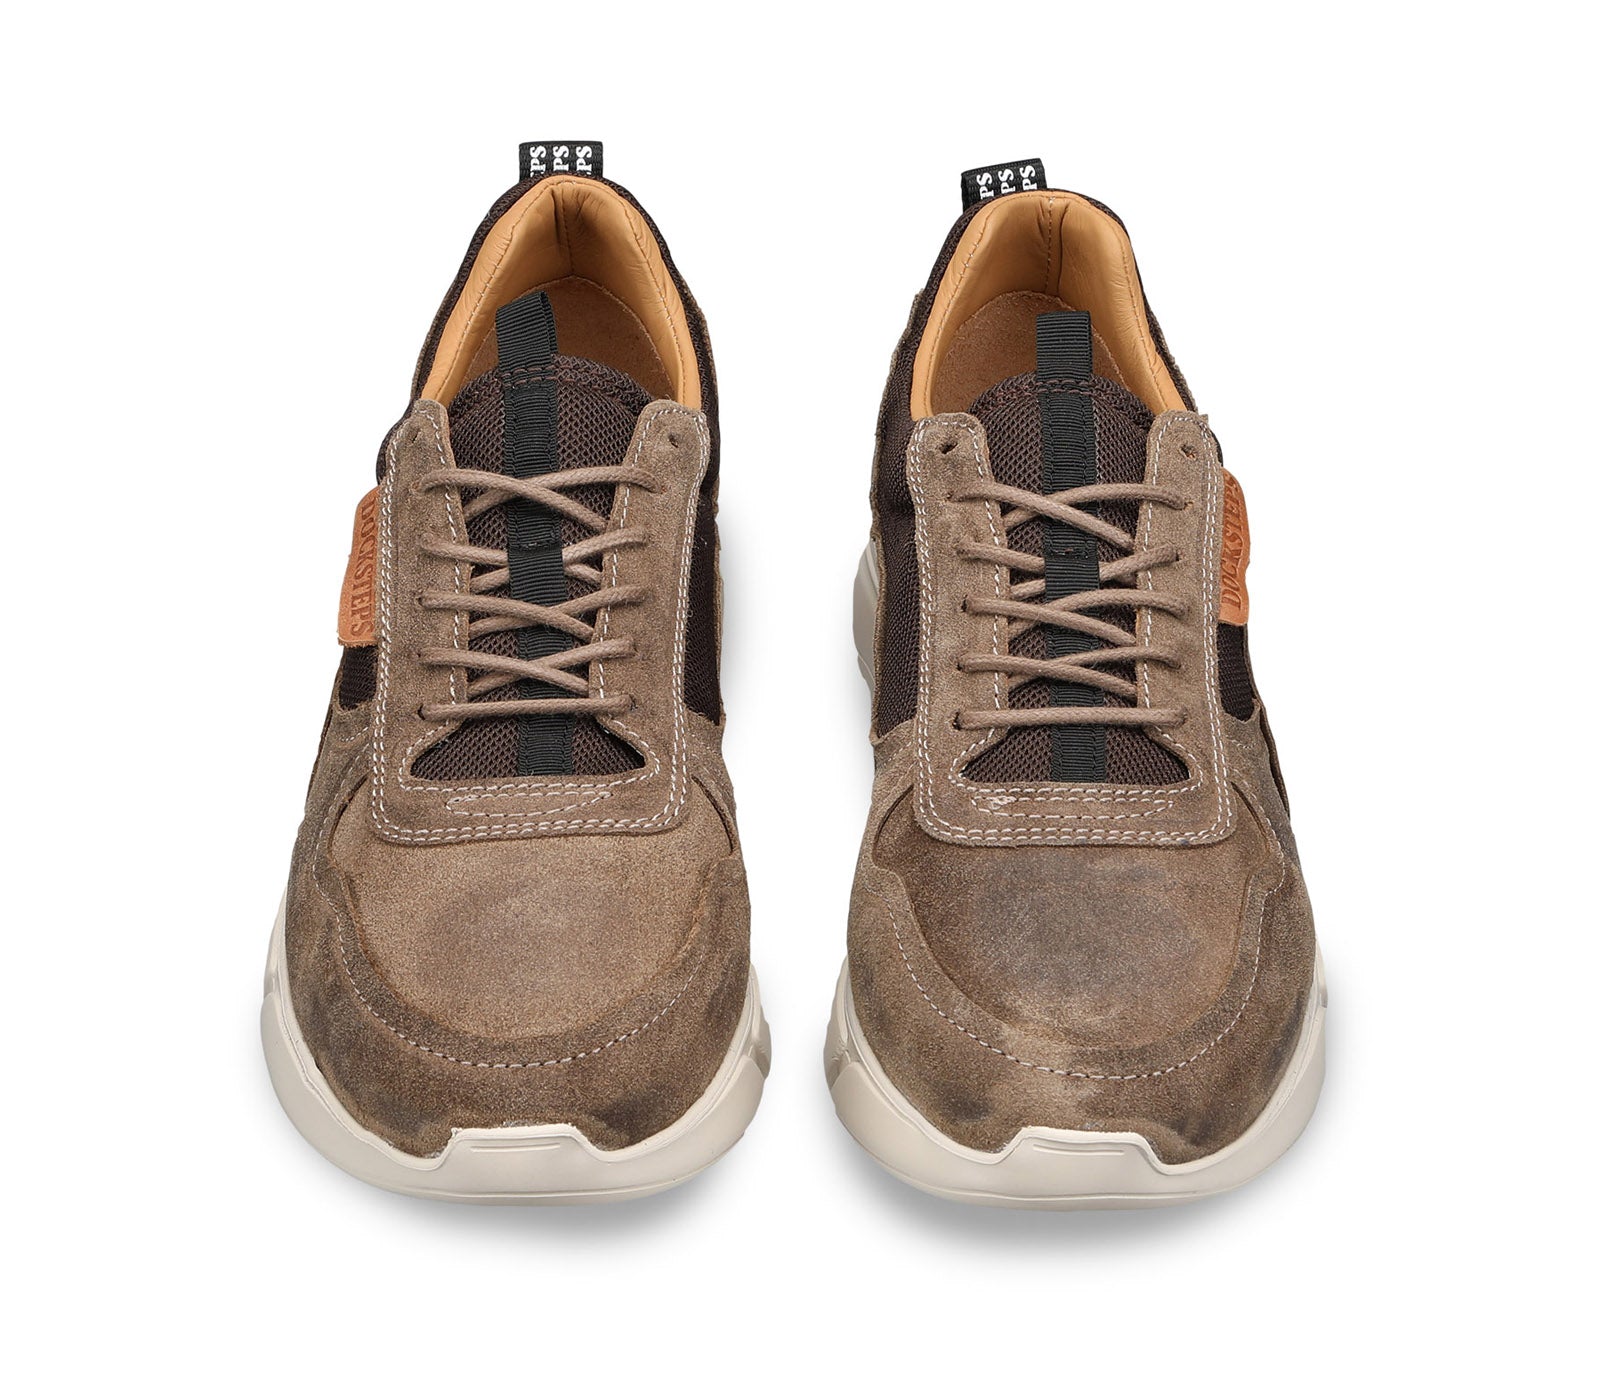 Men's Sneakers in Mixed Suede and Technical Fabric with White Rubber Sole